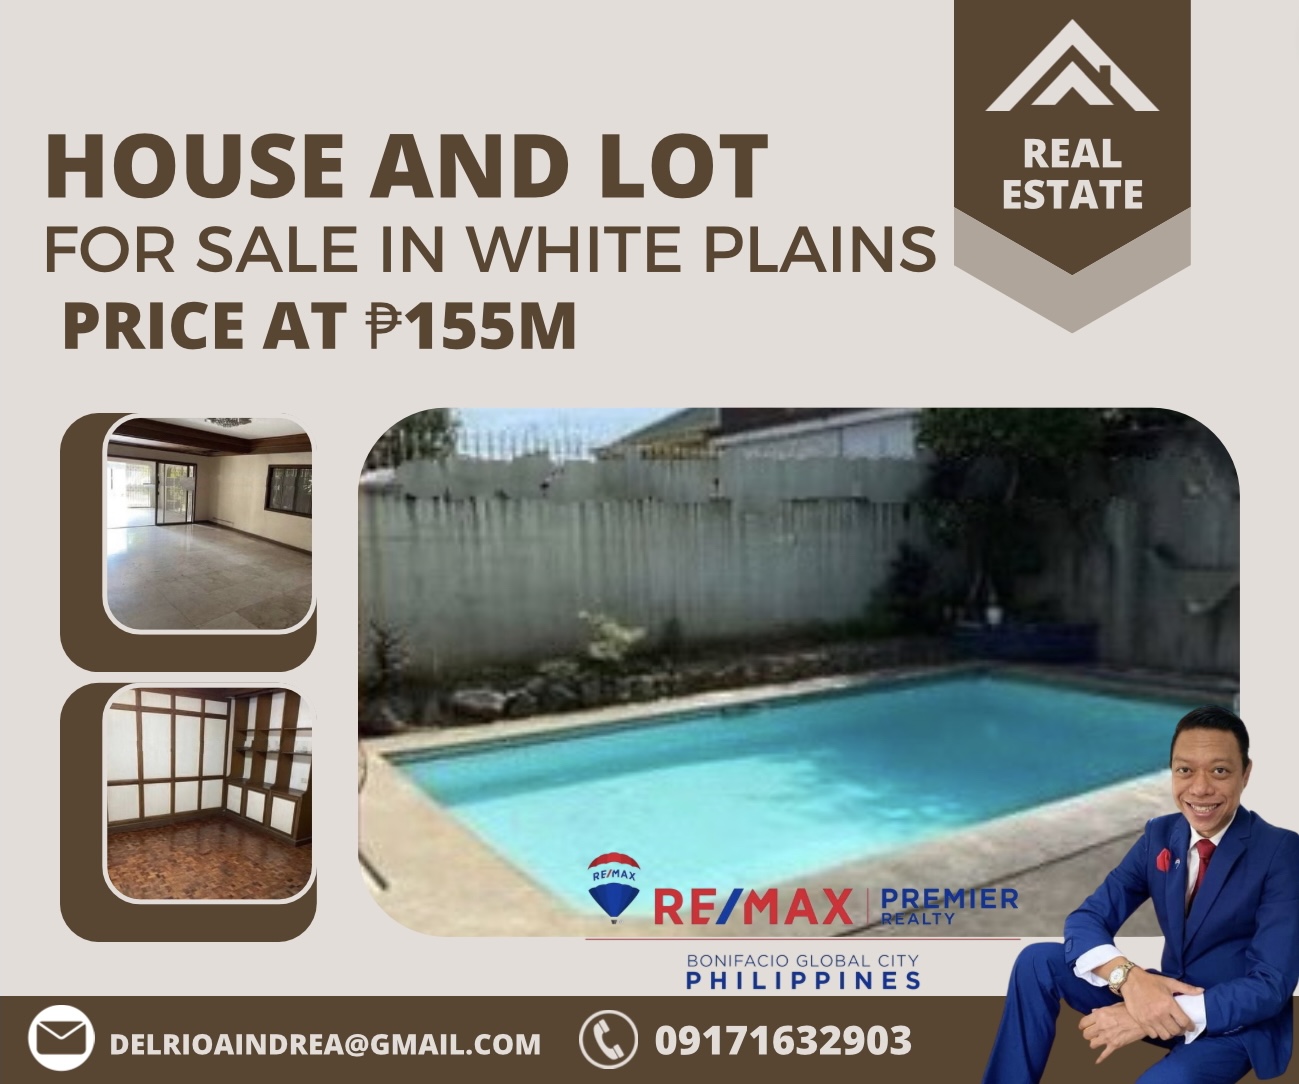 House and Lot for Sale in Katipunan, White Plains, Quezon City‼️